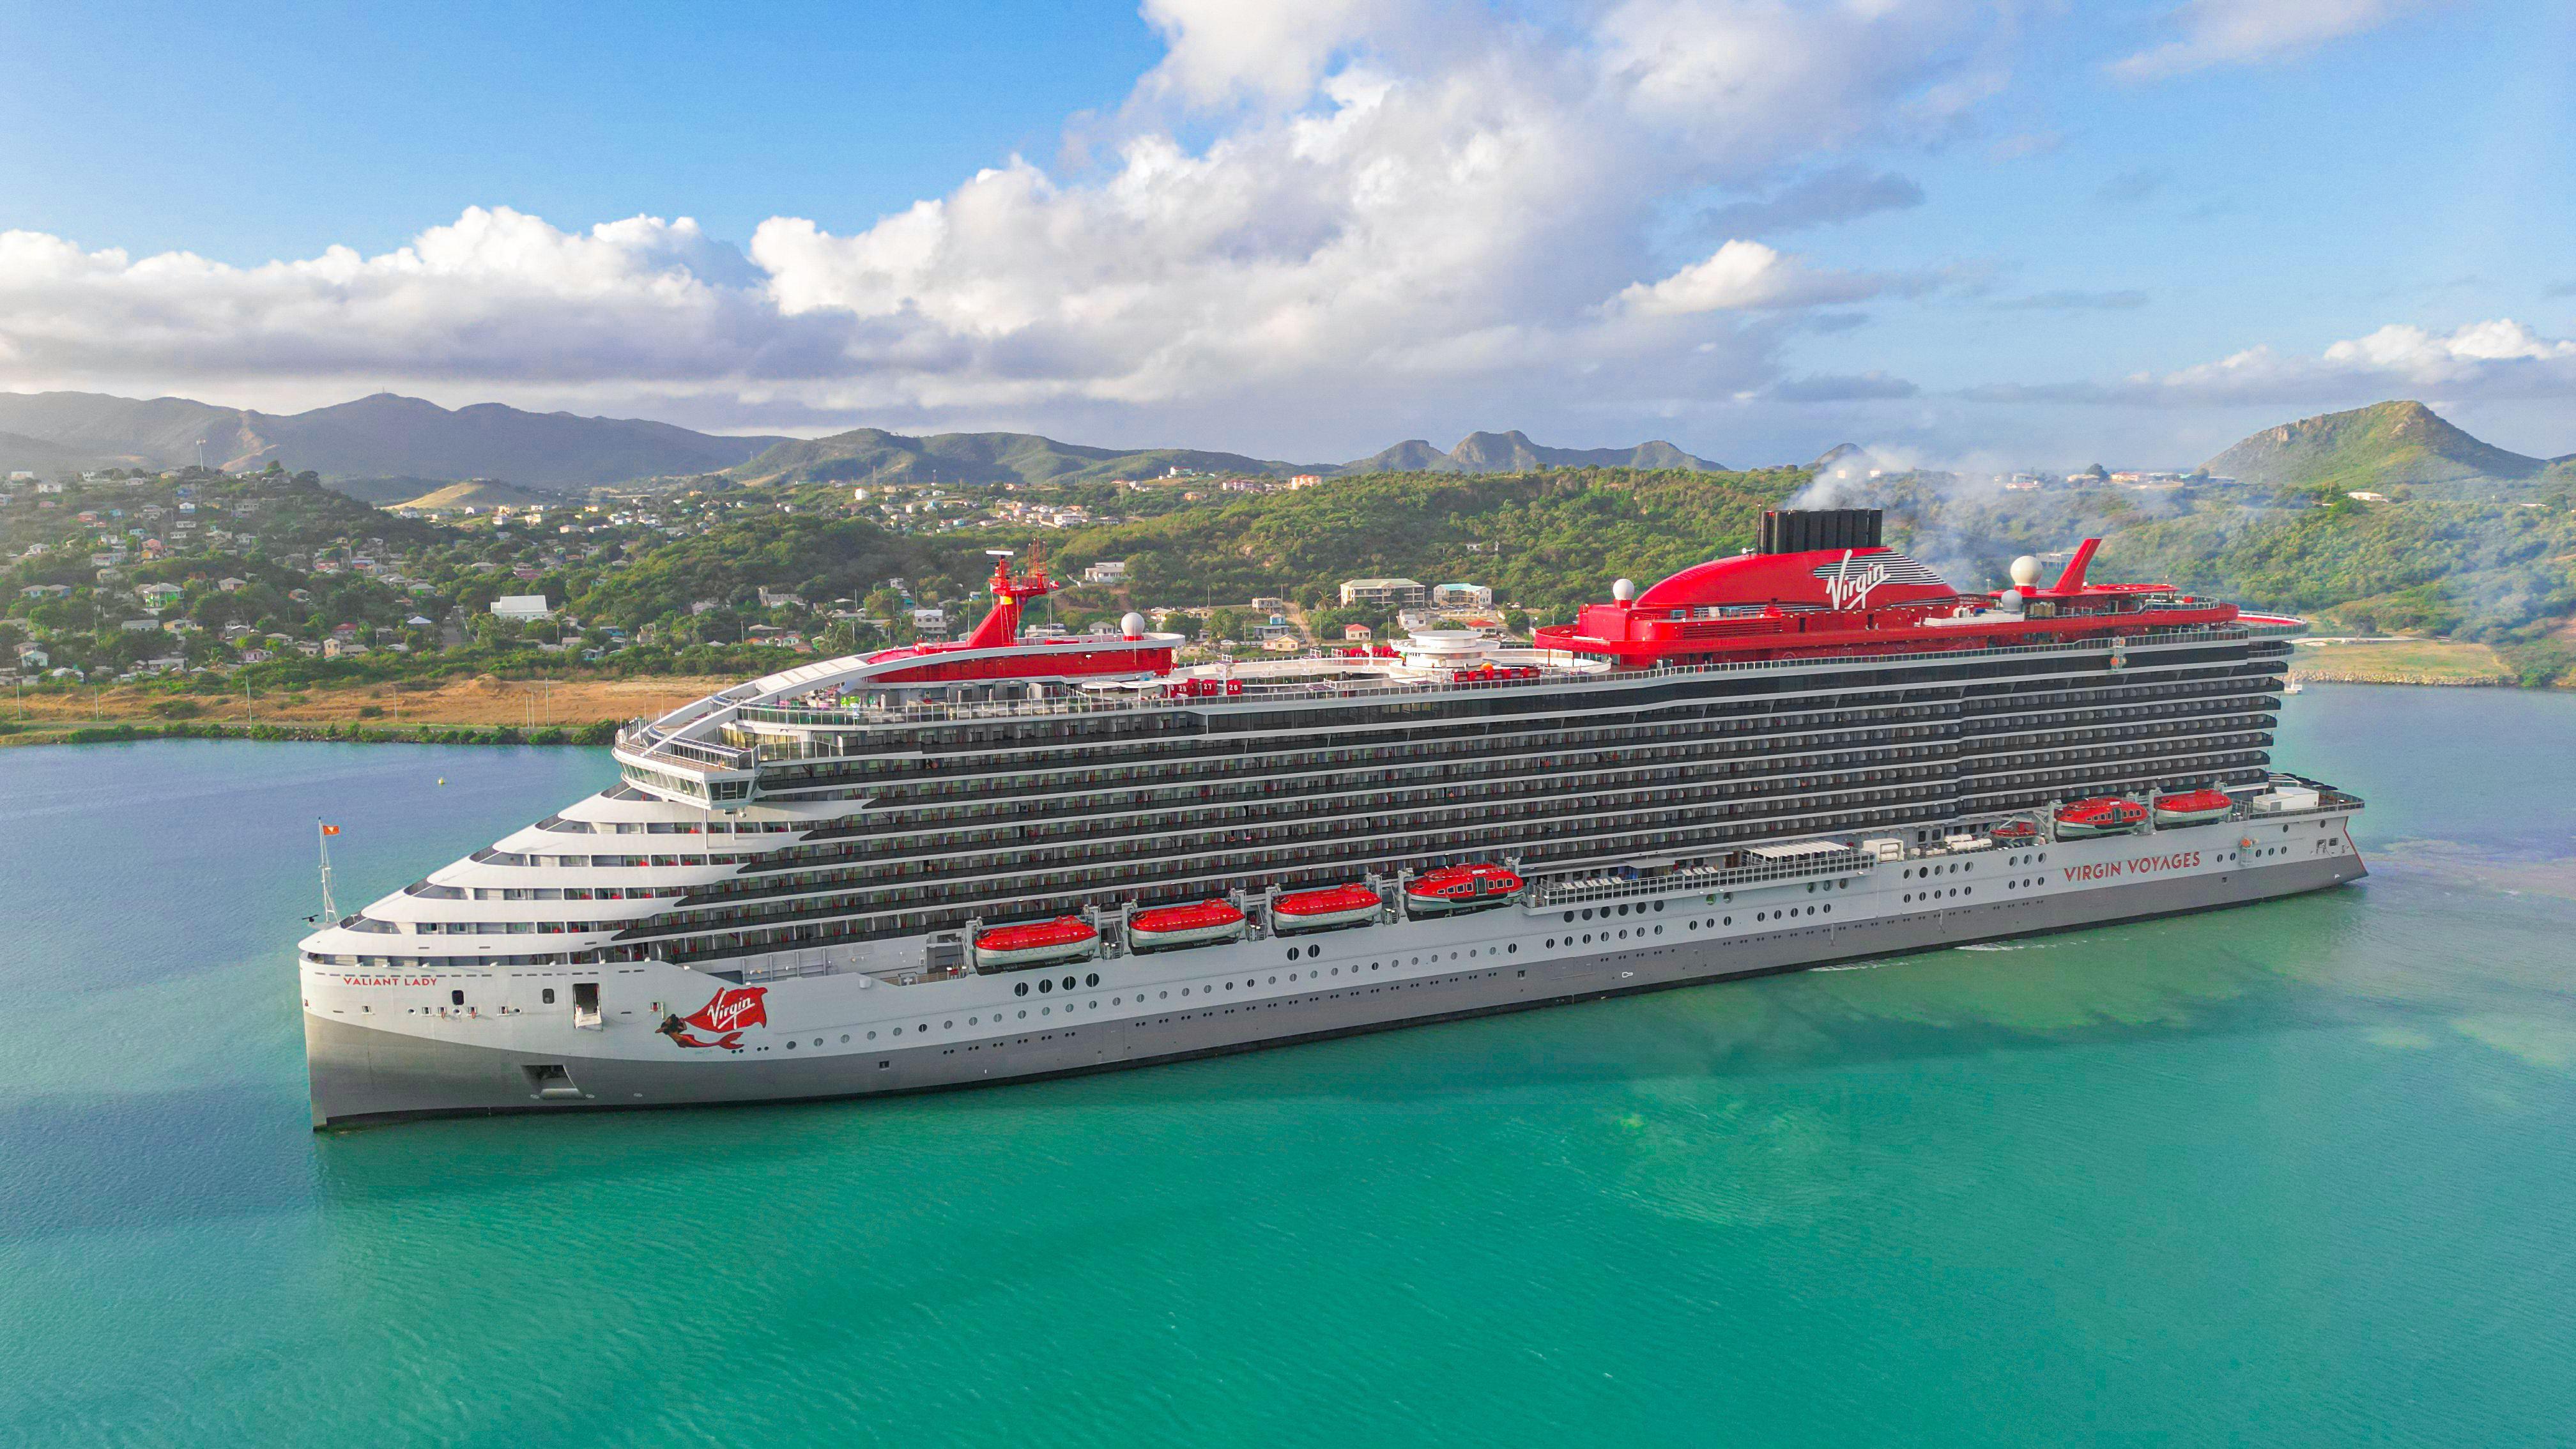 Antigua Cruise Port Welcomes Valiant Lady of Virgin Voyages